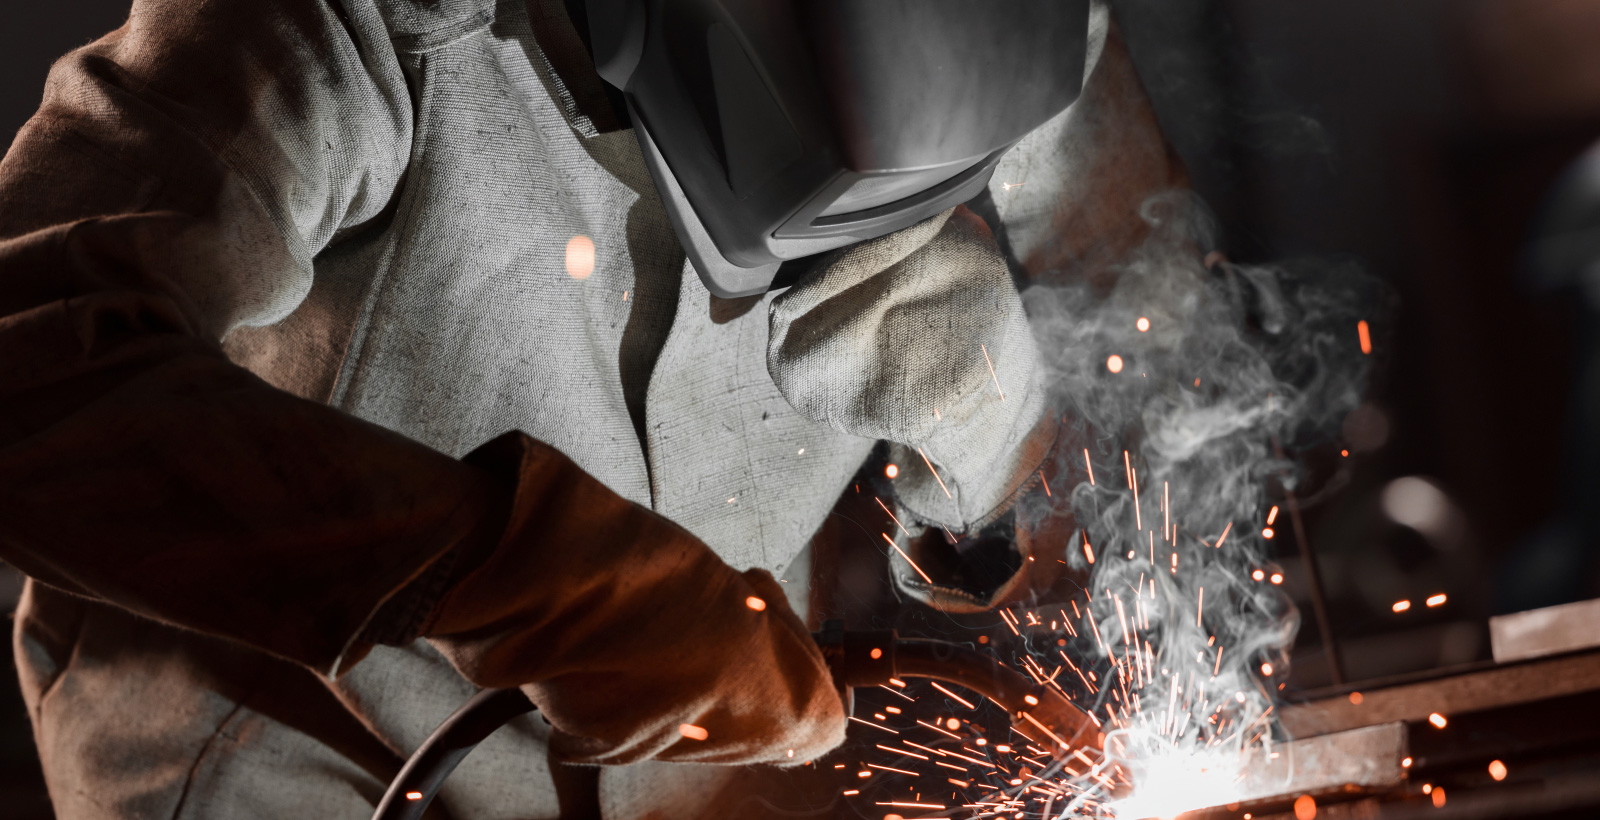 MMA Welding Services